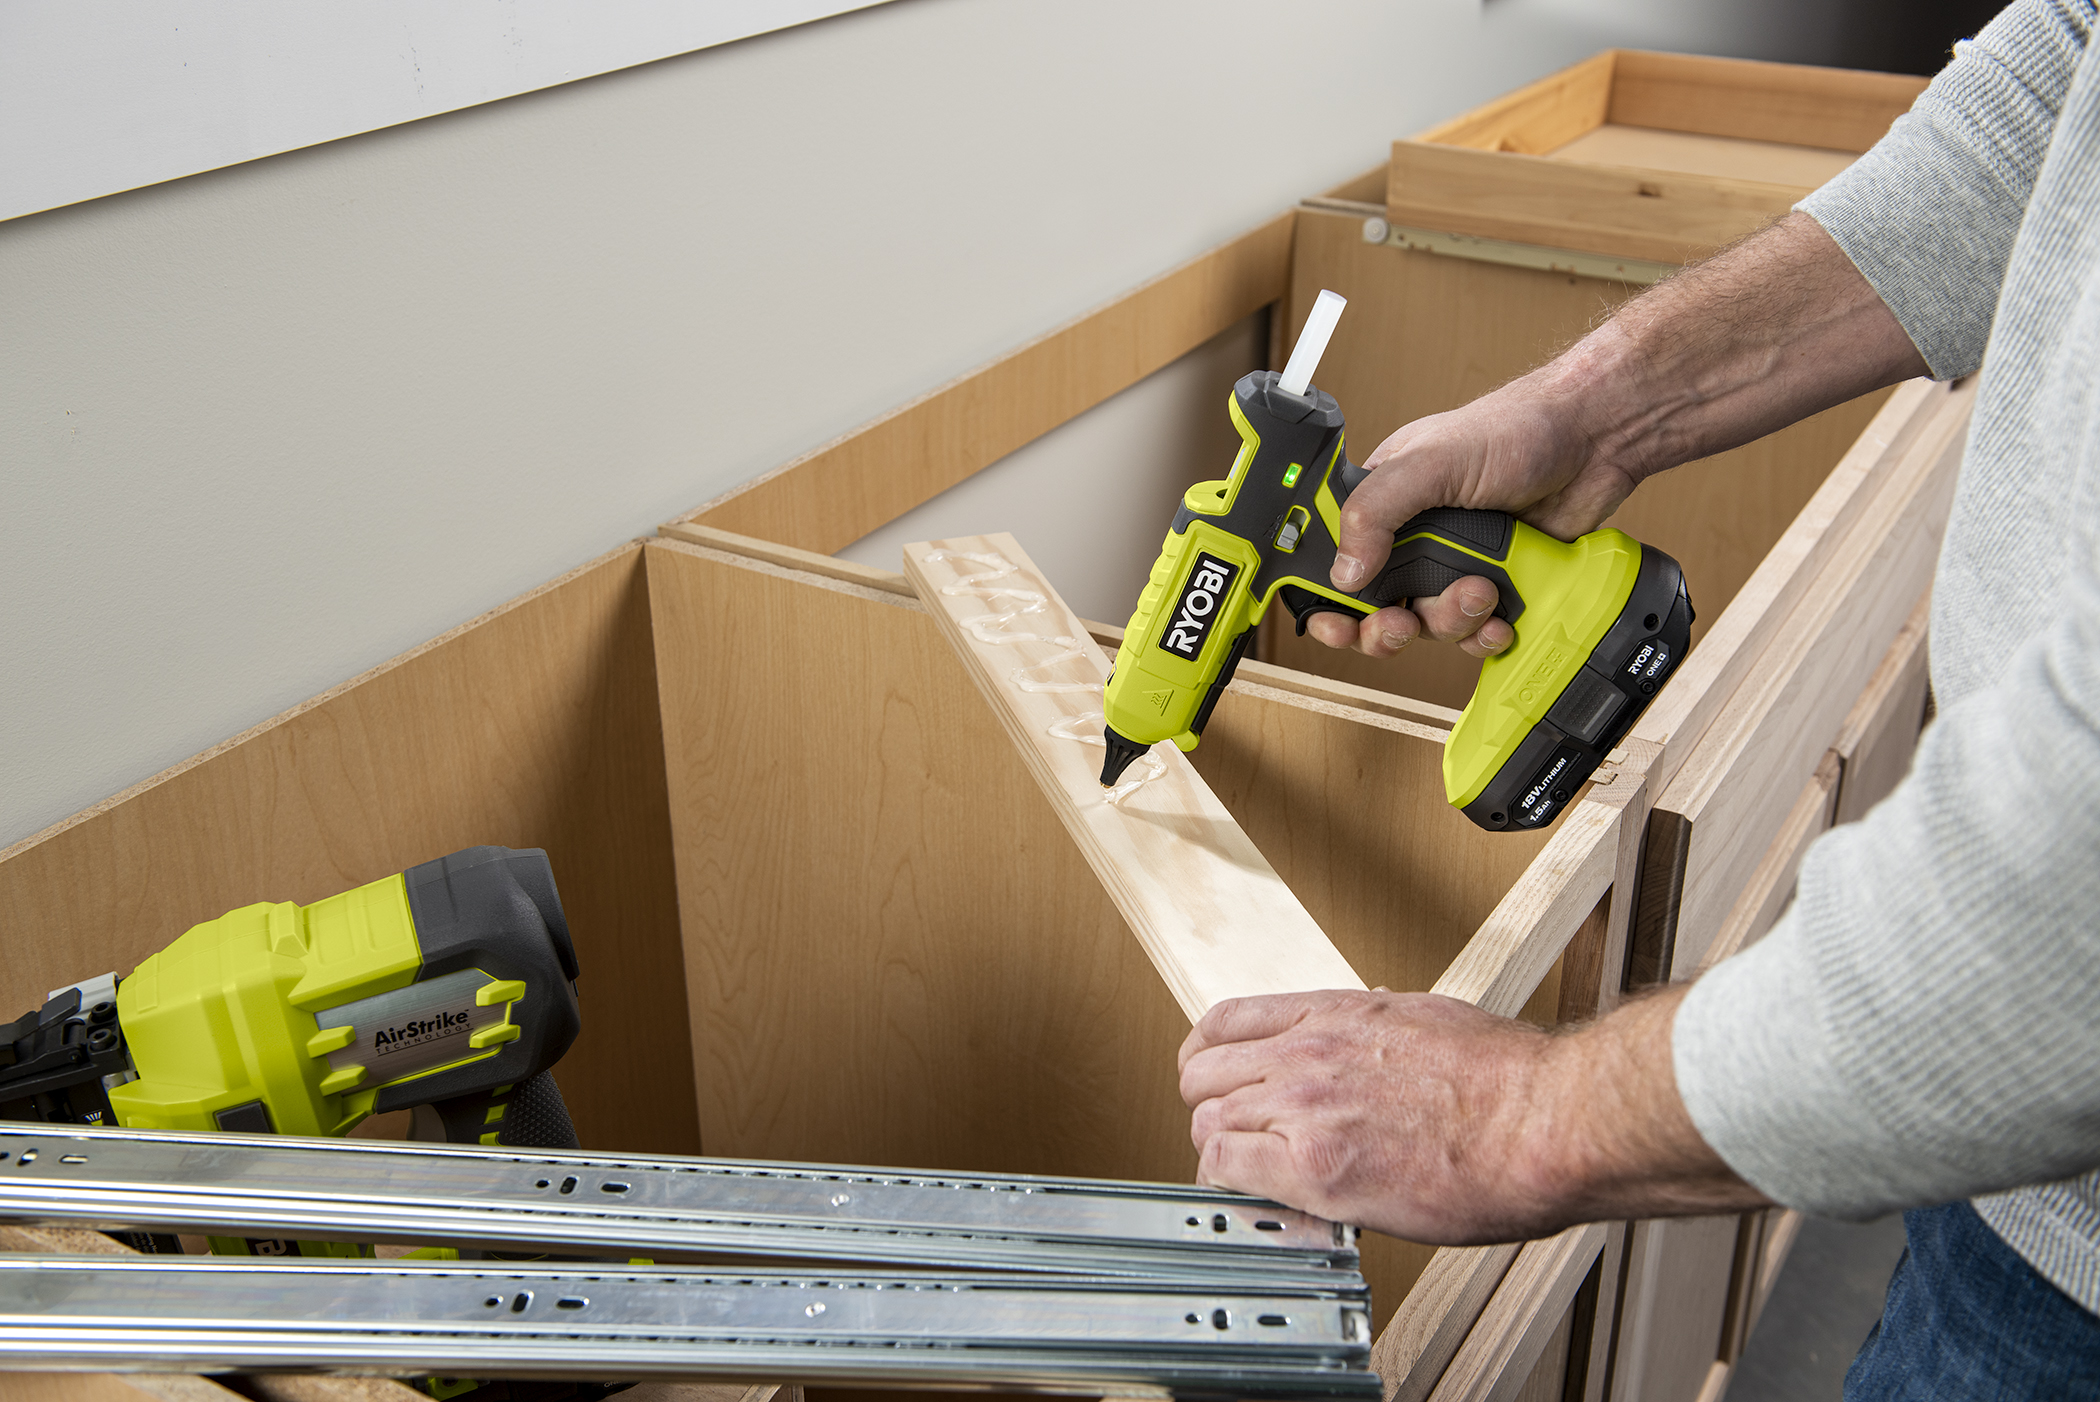 RYOBI ONE+ 18V Cordless Dual Temperature Glue Gun (Tool Only) with